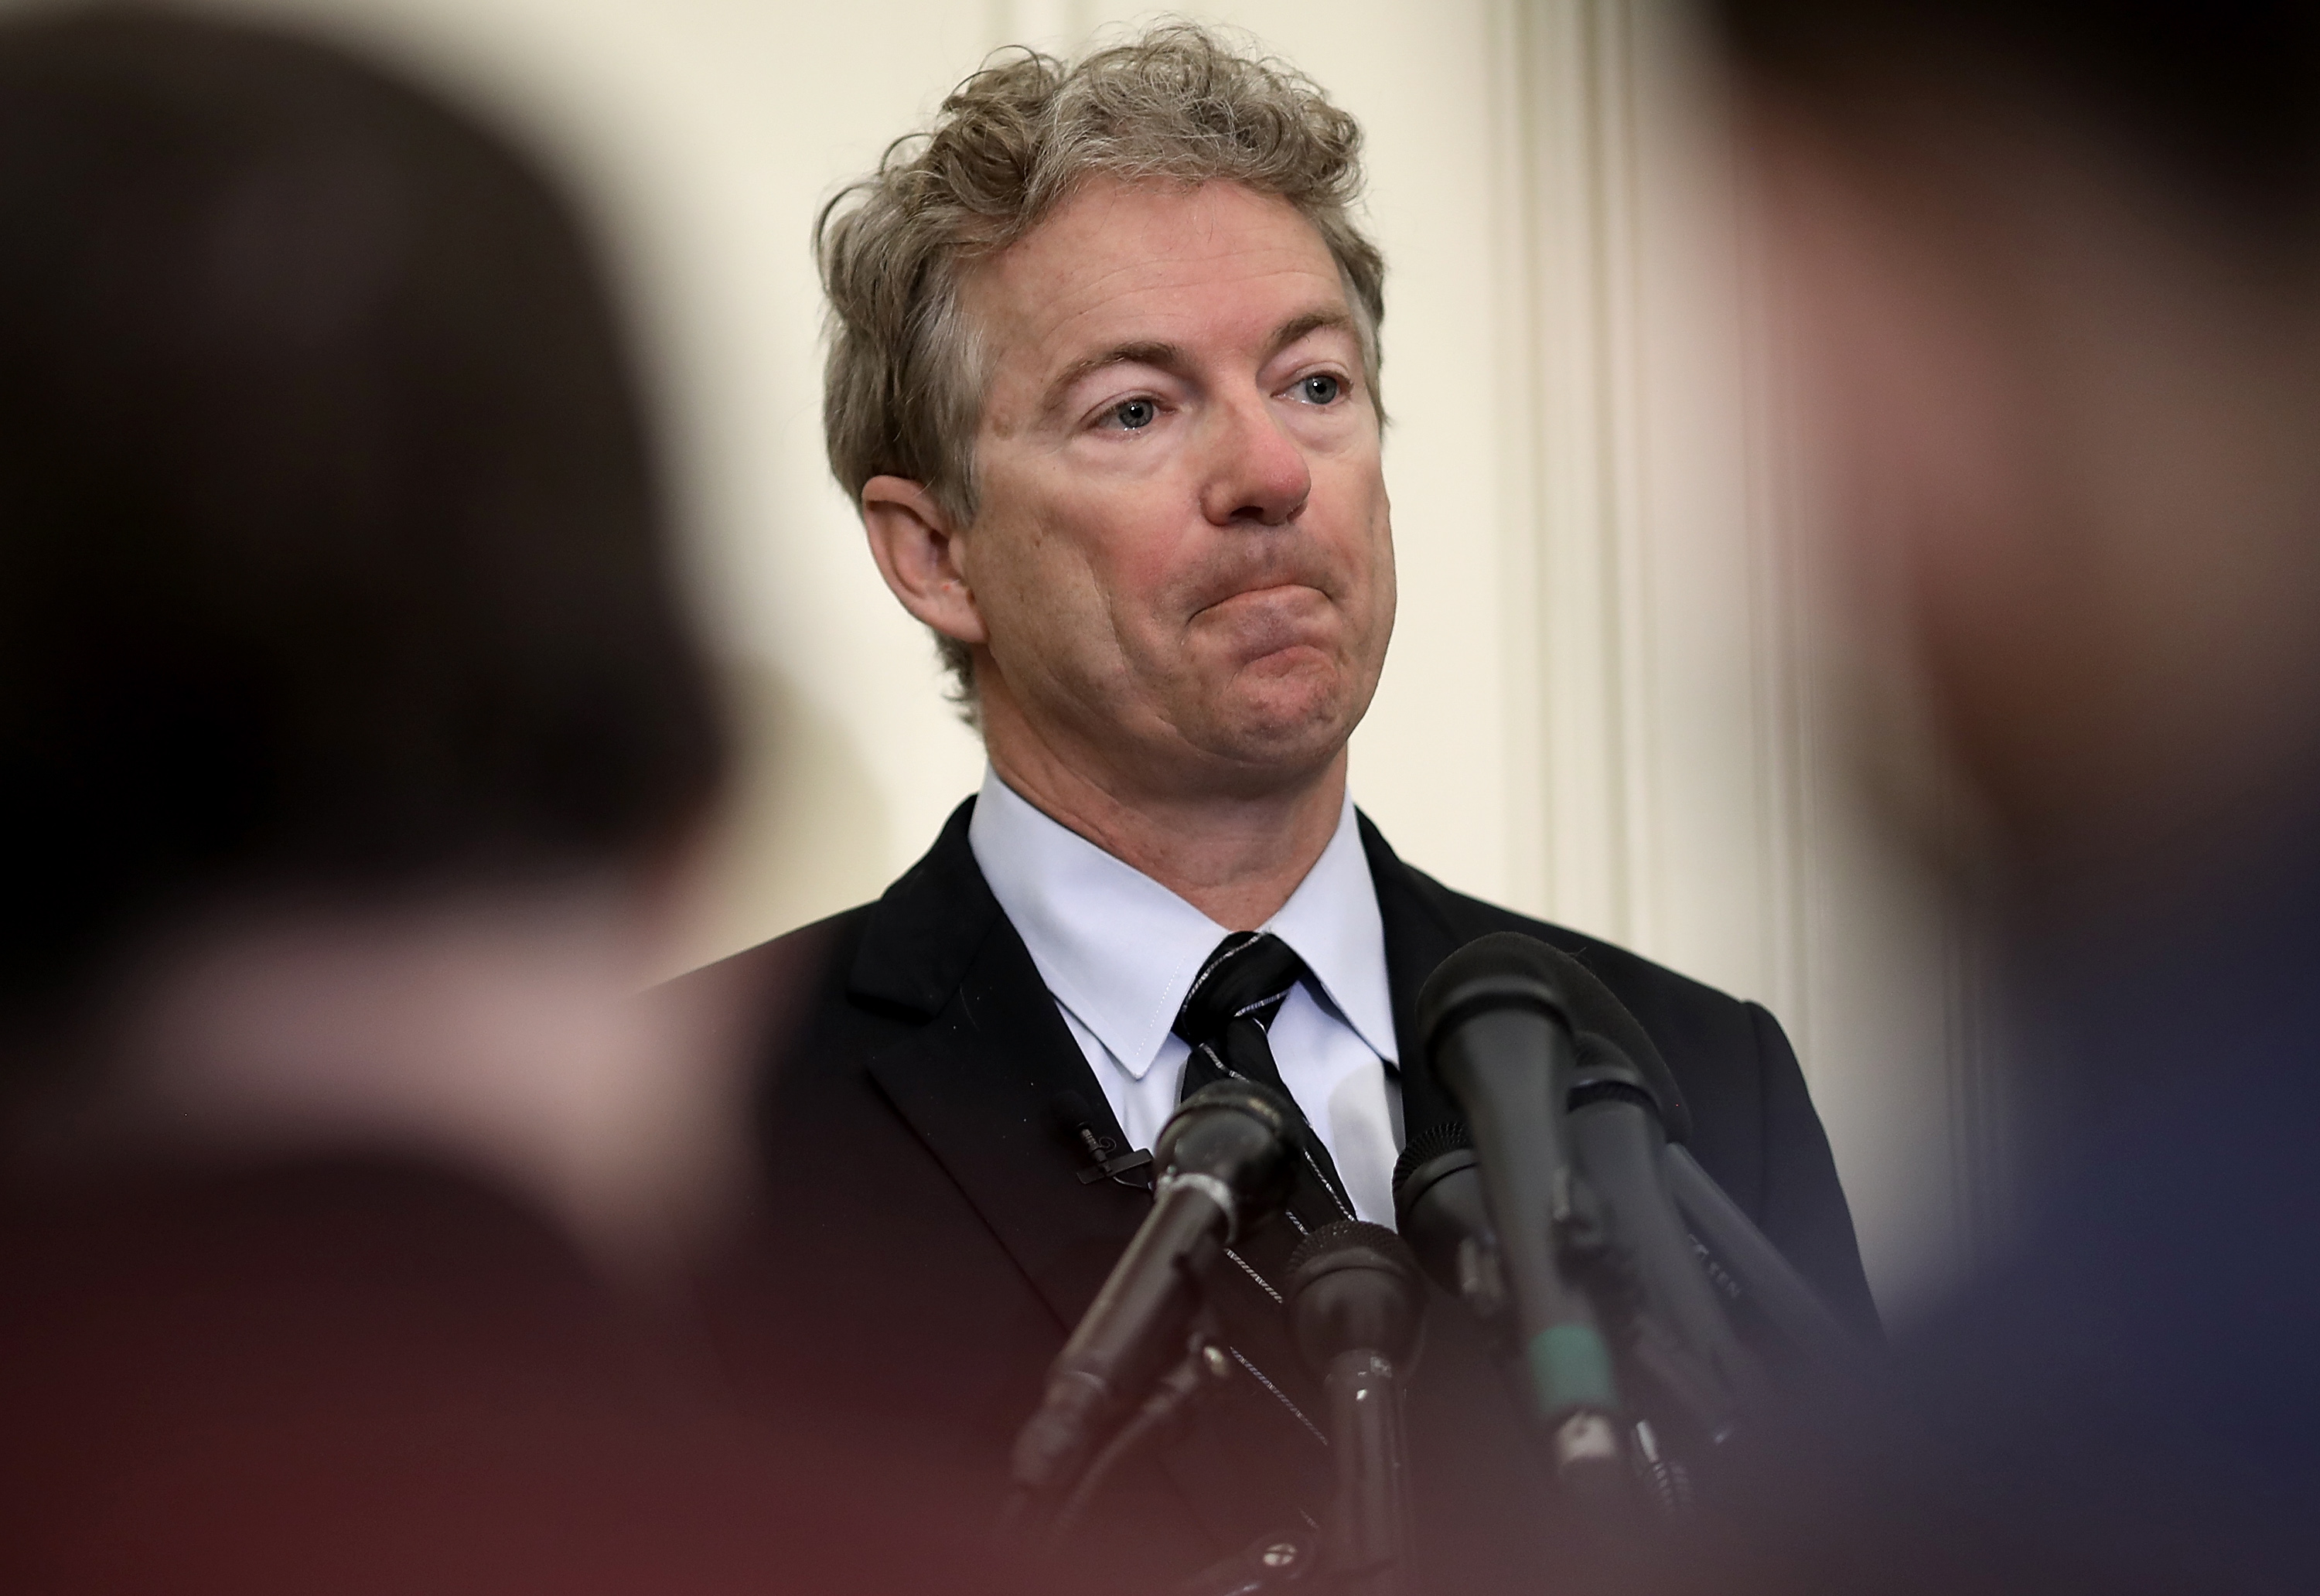 Sen. Rand Paul (R-KY) speaks during a press conference at the U.S. Capitol on March 14, 2018 in Washington, DC. (Win McNamee—Getty Images)